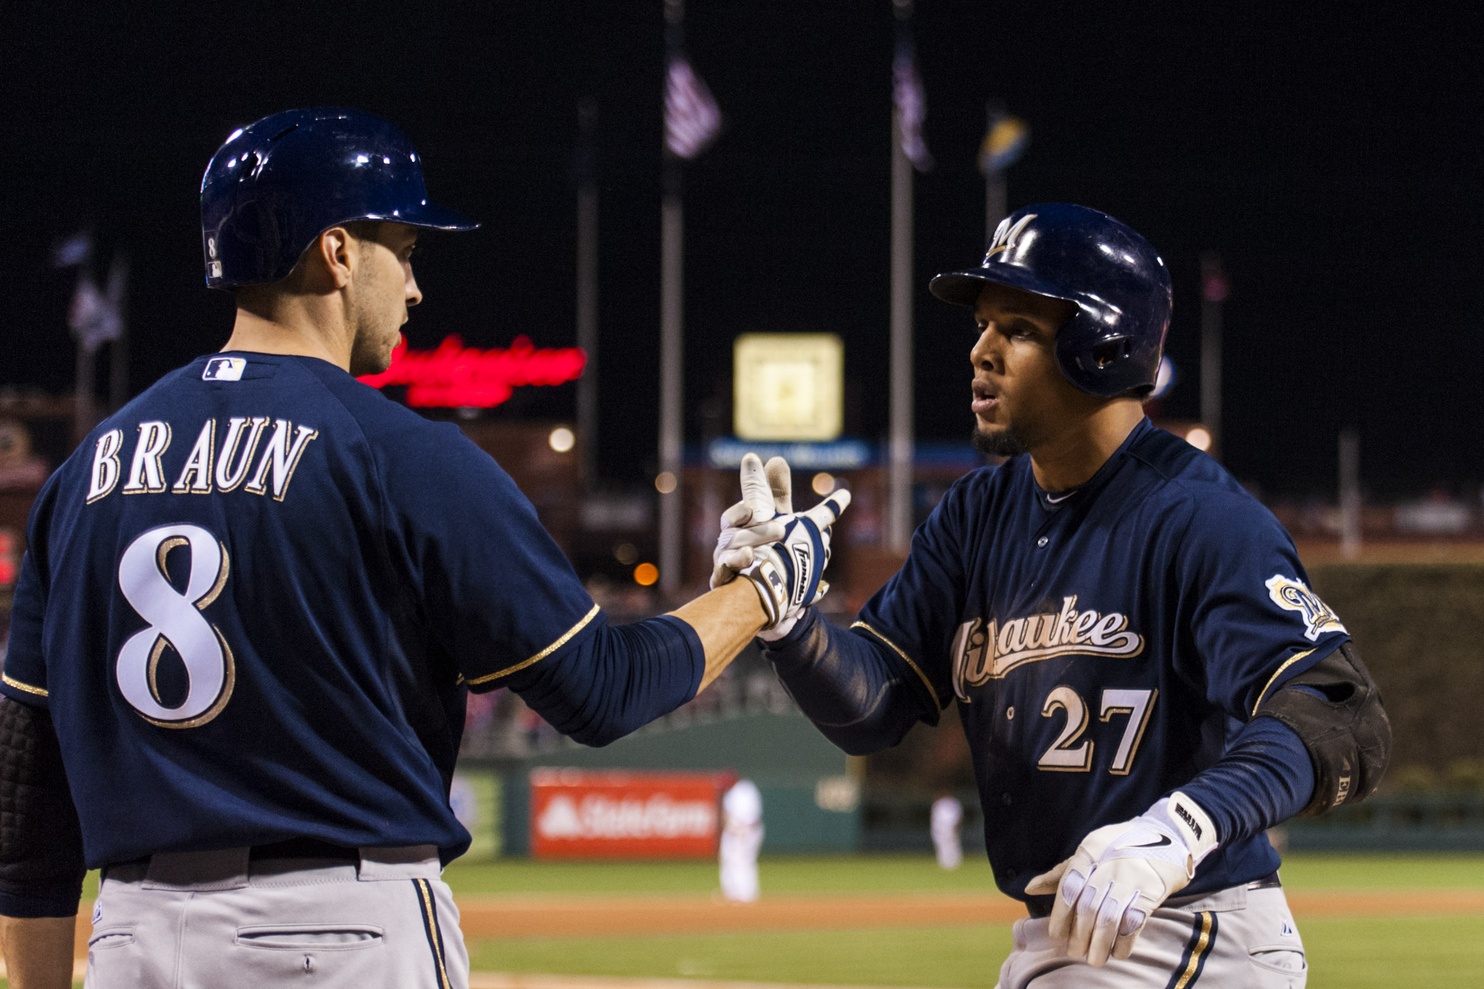 Ryan Braun and Carlos Gomez lead the Brewers charge ahead. Photo by Howard Smith, USA Today Sports Images